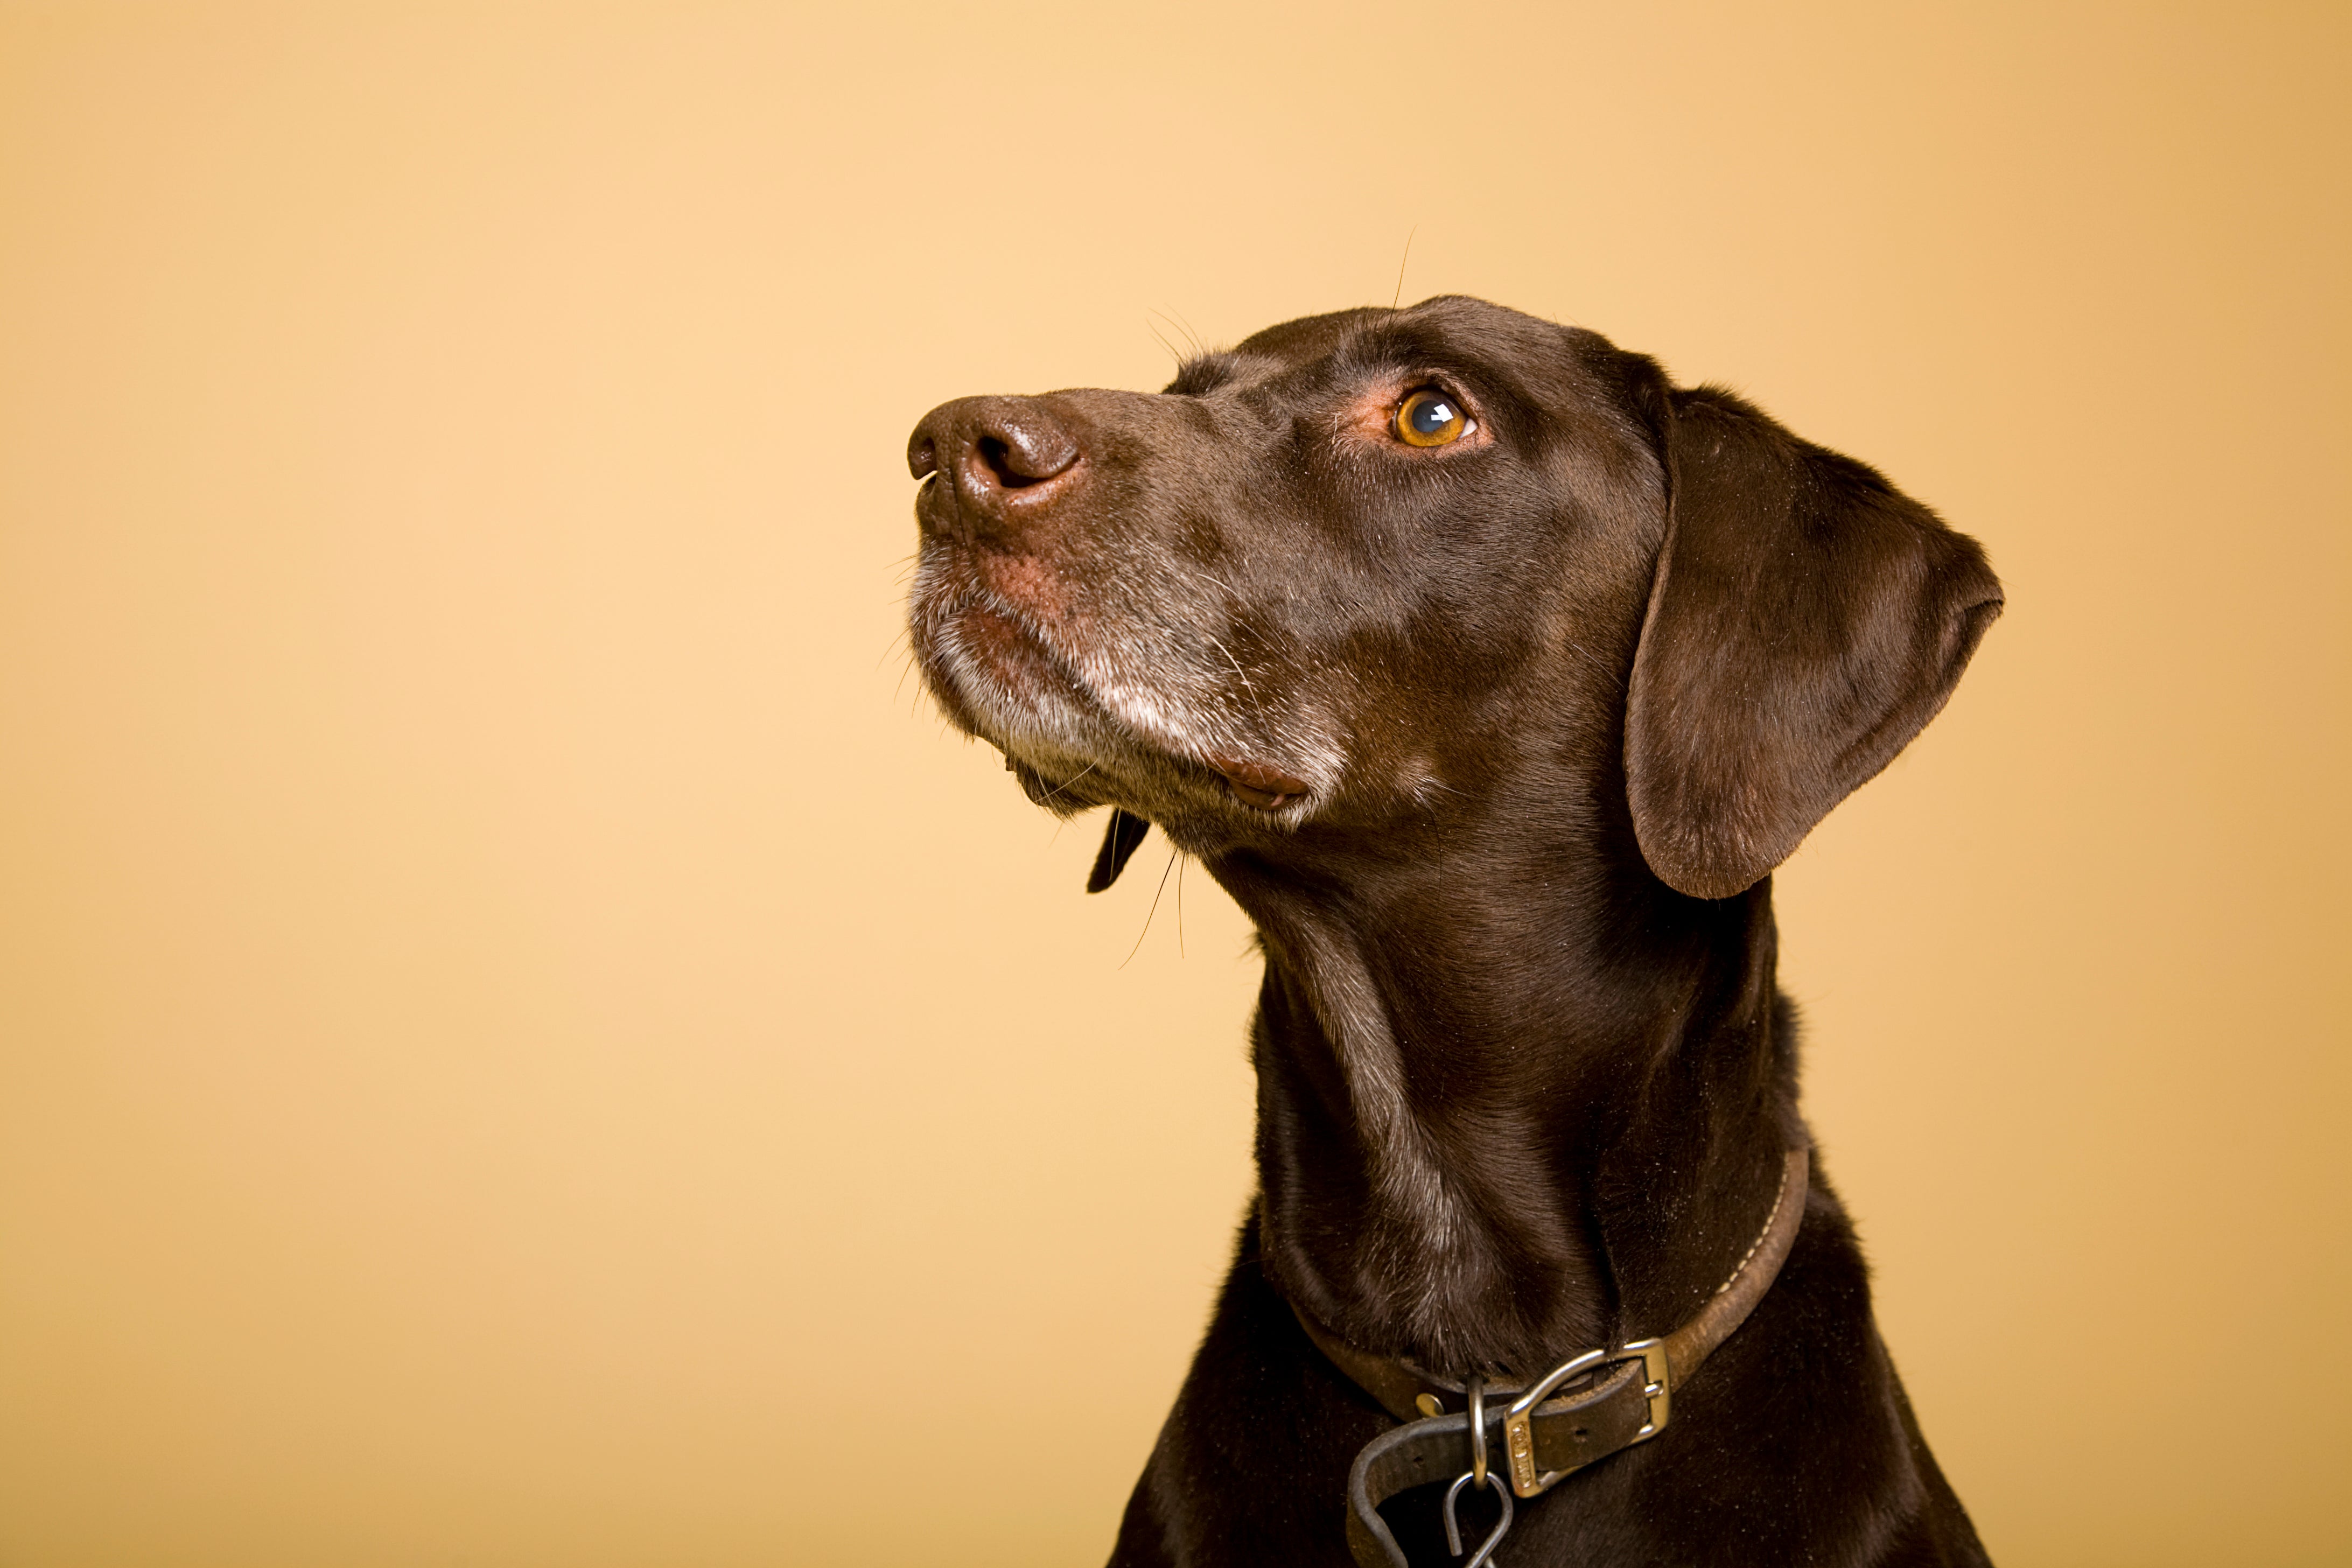 can untrained dogs detect cancer